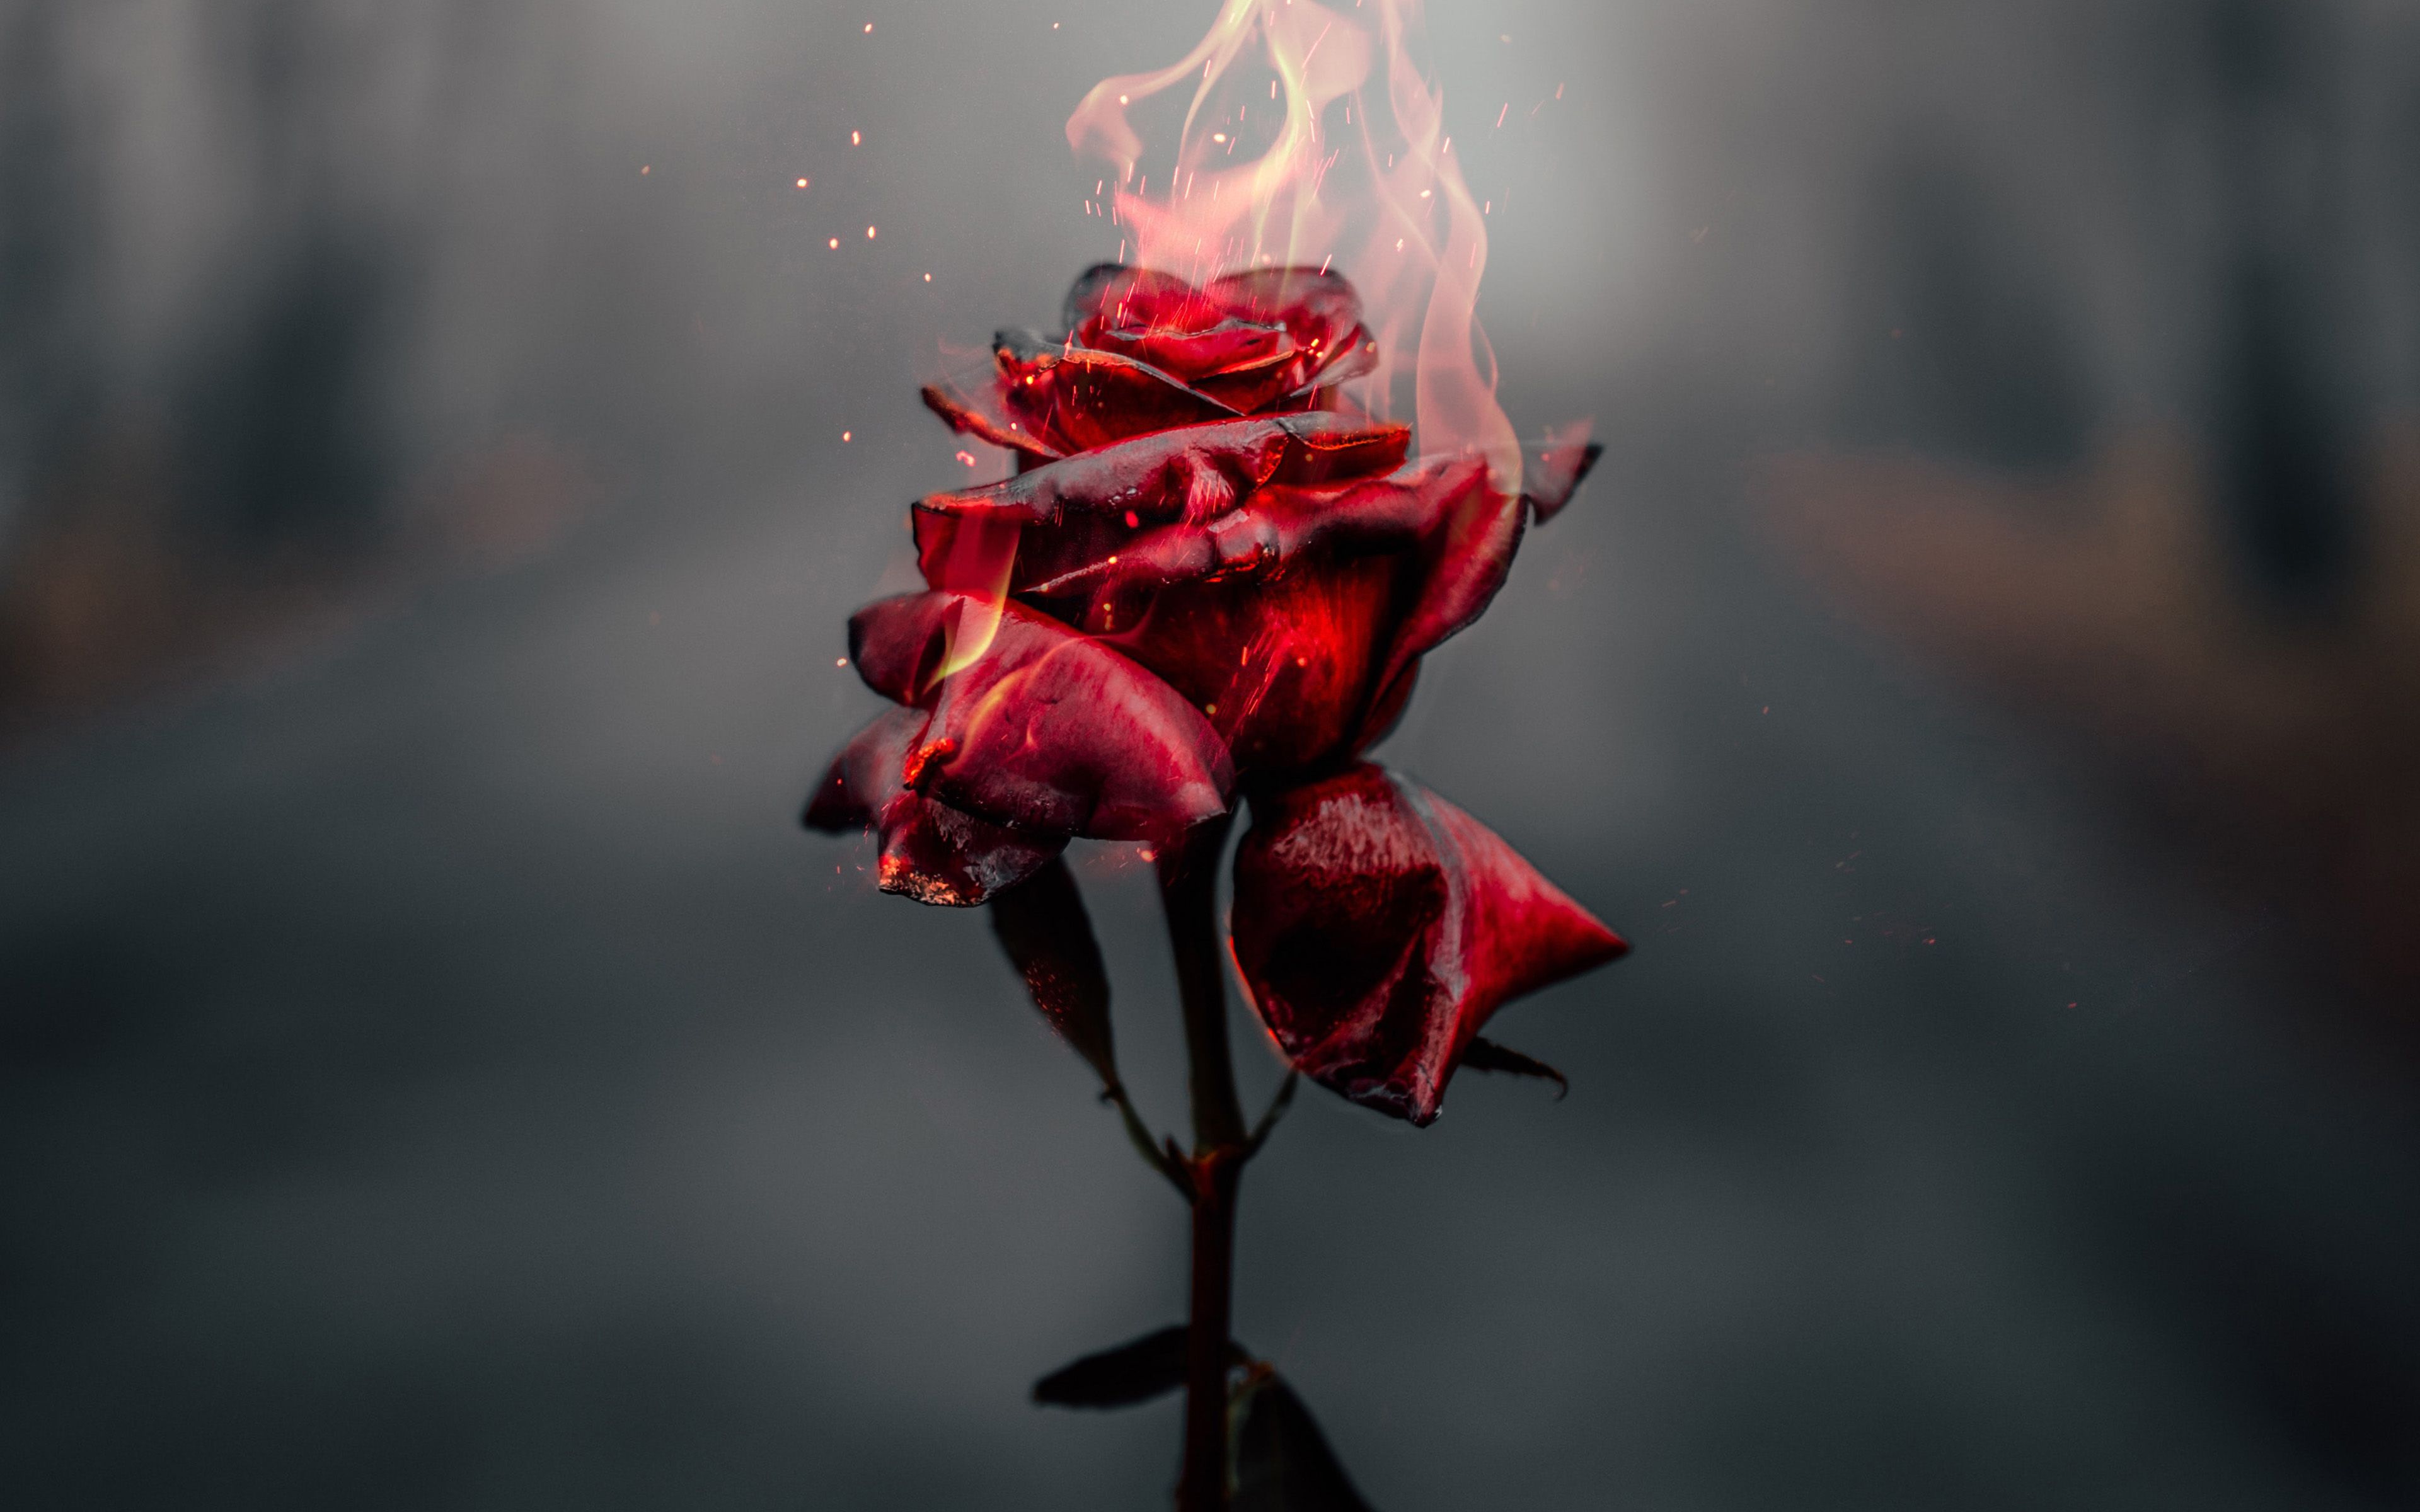 Download wallpaper burning rose, 4k, fire flames, broken love concept, burning flower, roses for desktop with resolution 3840x2400. High Quality HD picture wallpaper